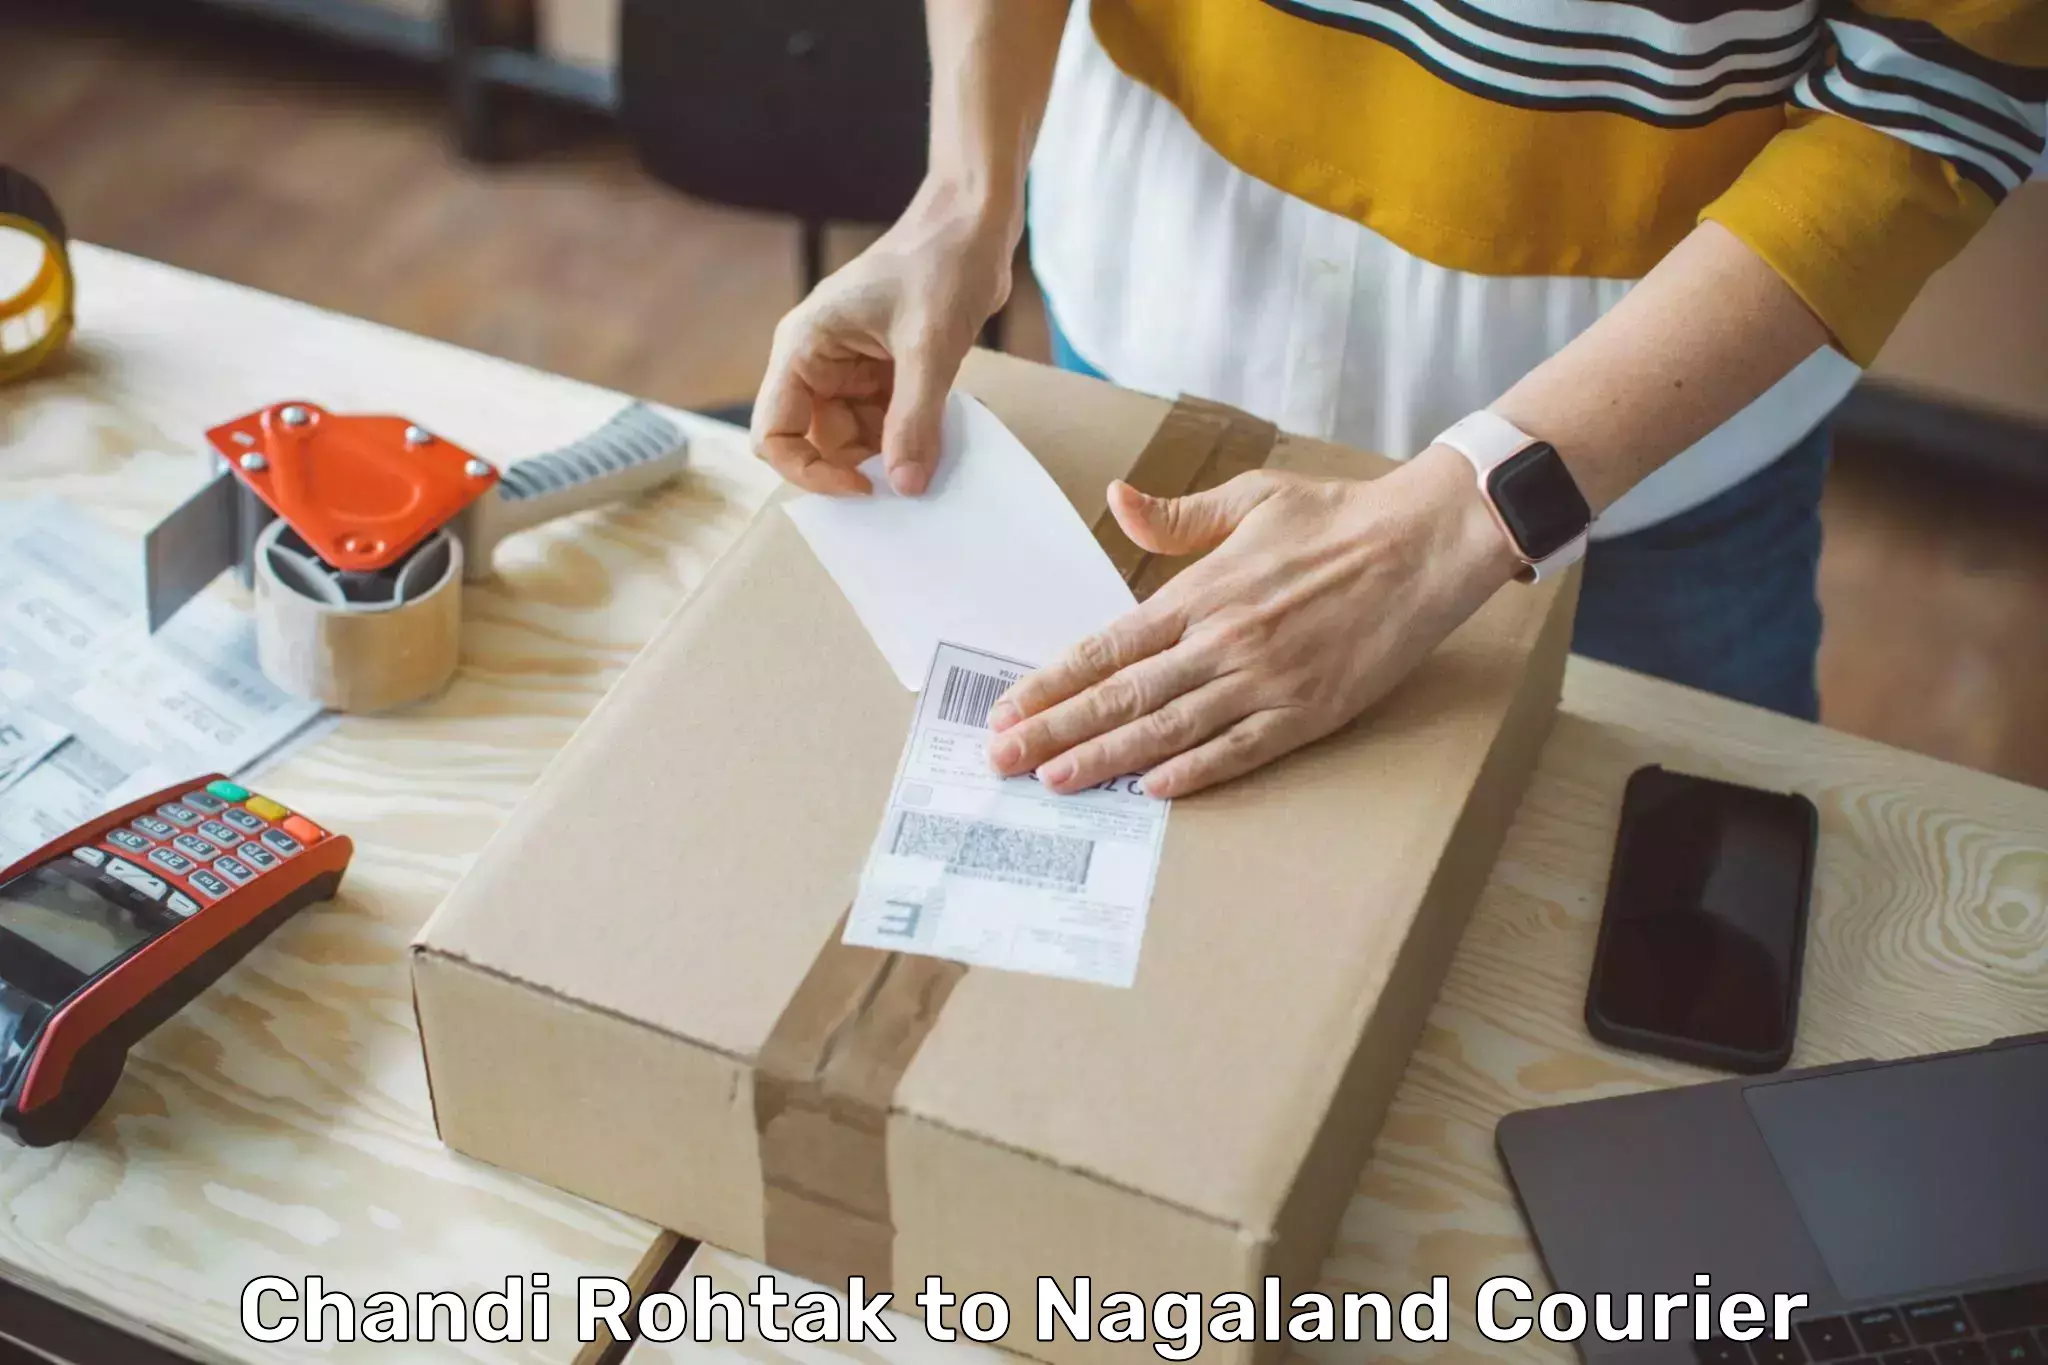 Subscription-based courier Chandi Rohtak to Nagaland